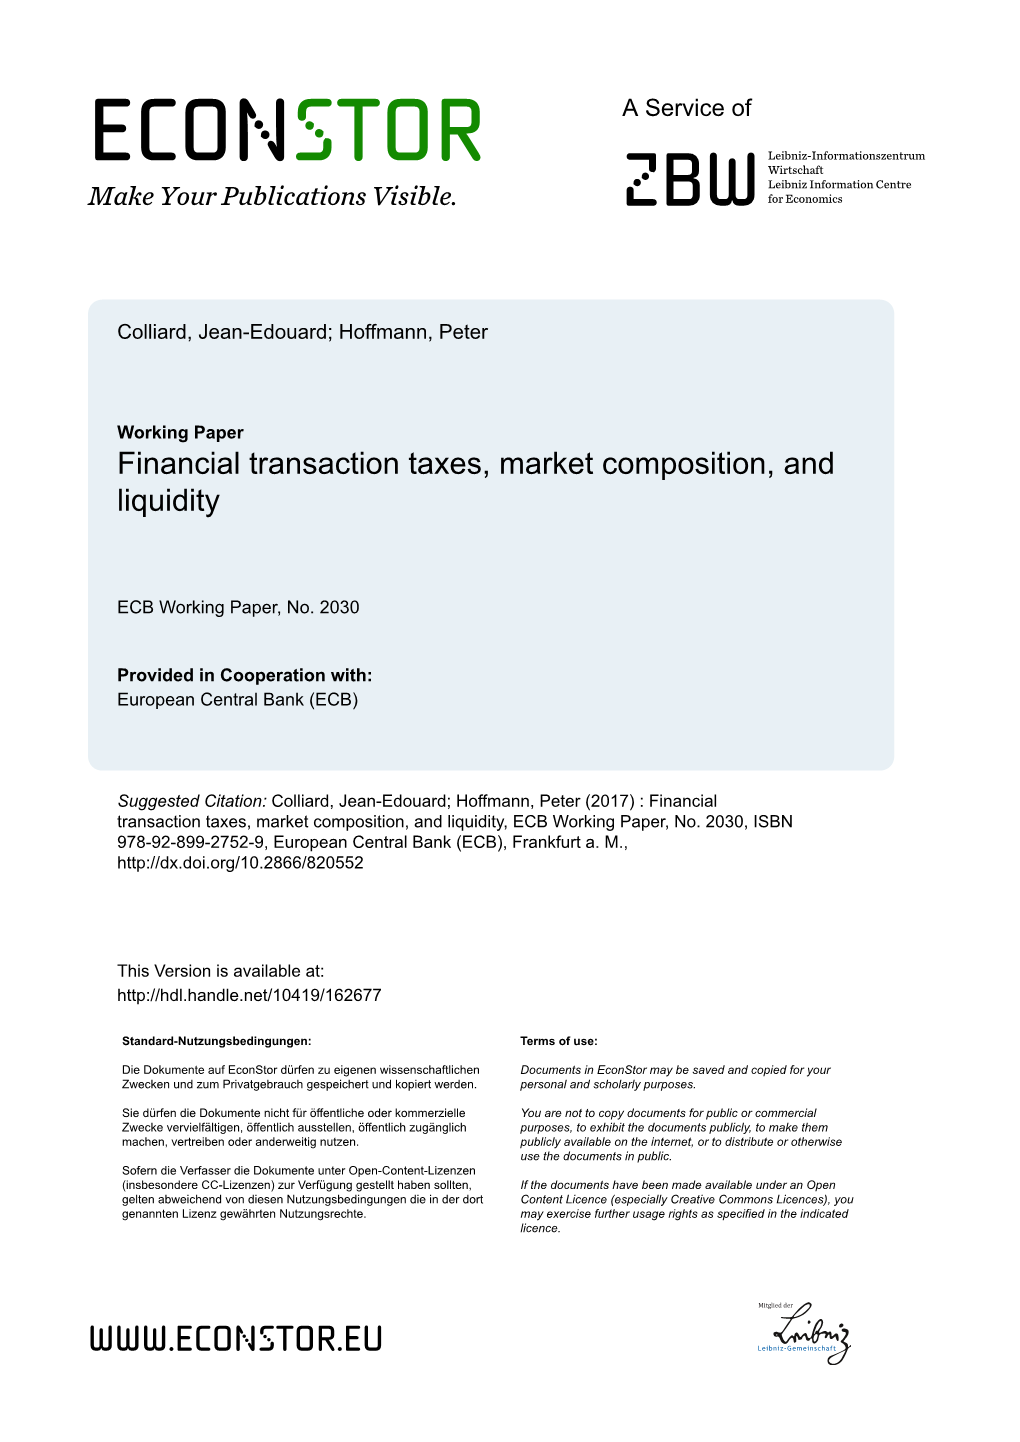 Financial Transaction Taxes, Market Composition, and Liquidity